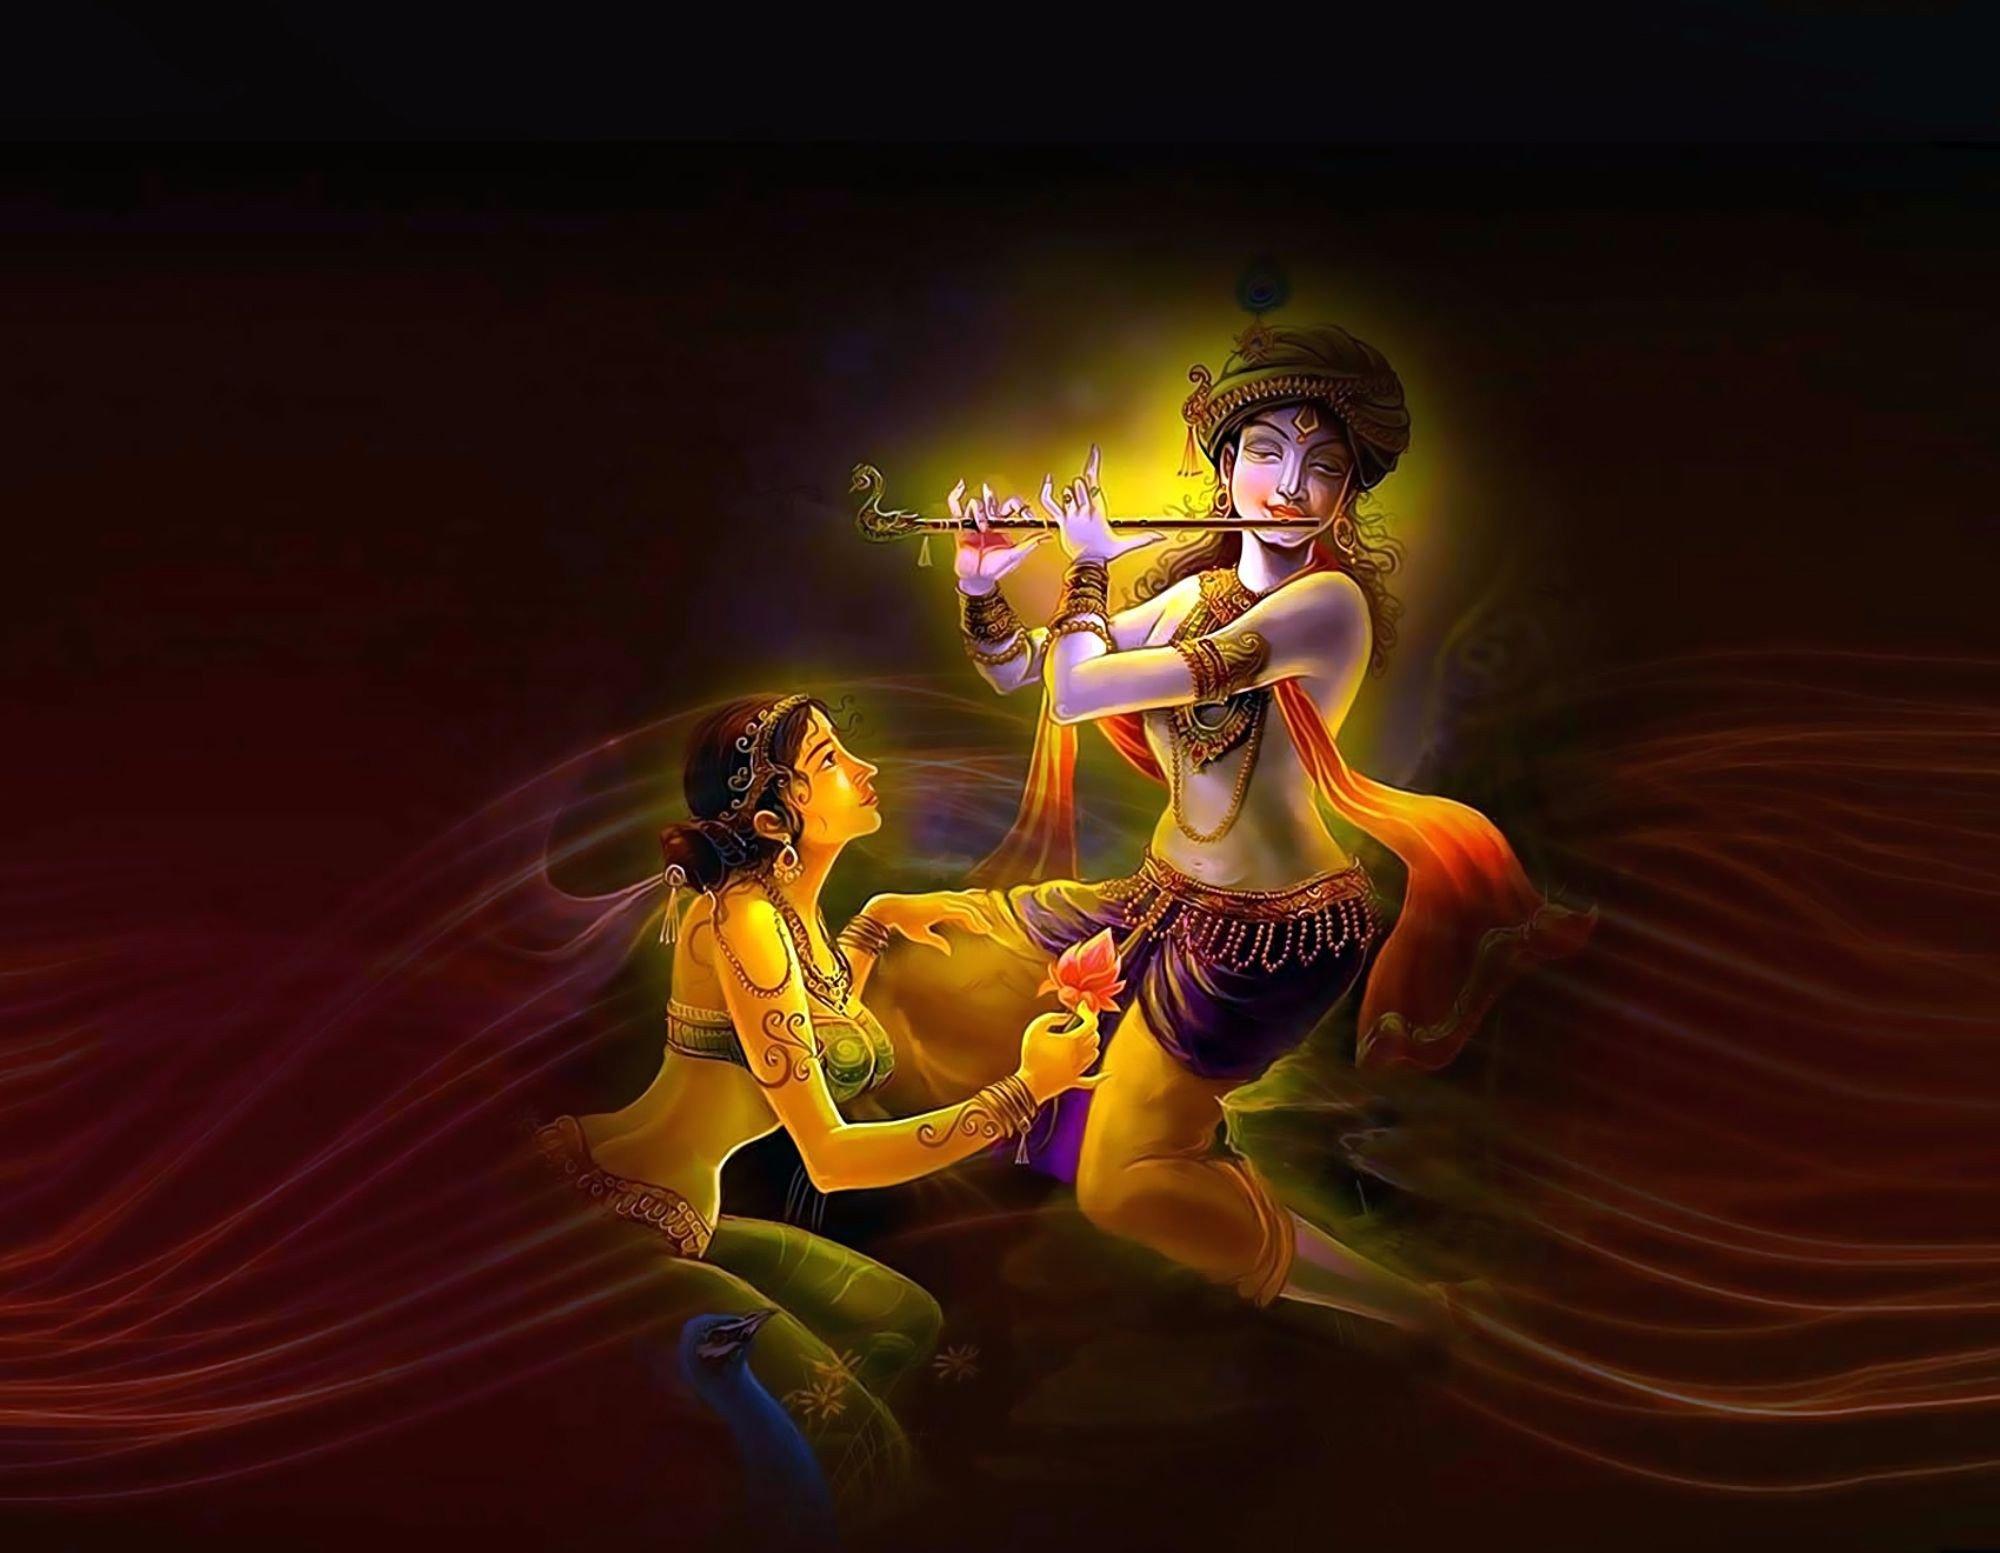 Simon Gipps Kent ⁓ Picture Of Lord Krishna With Flute